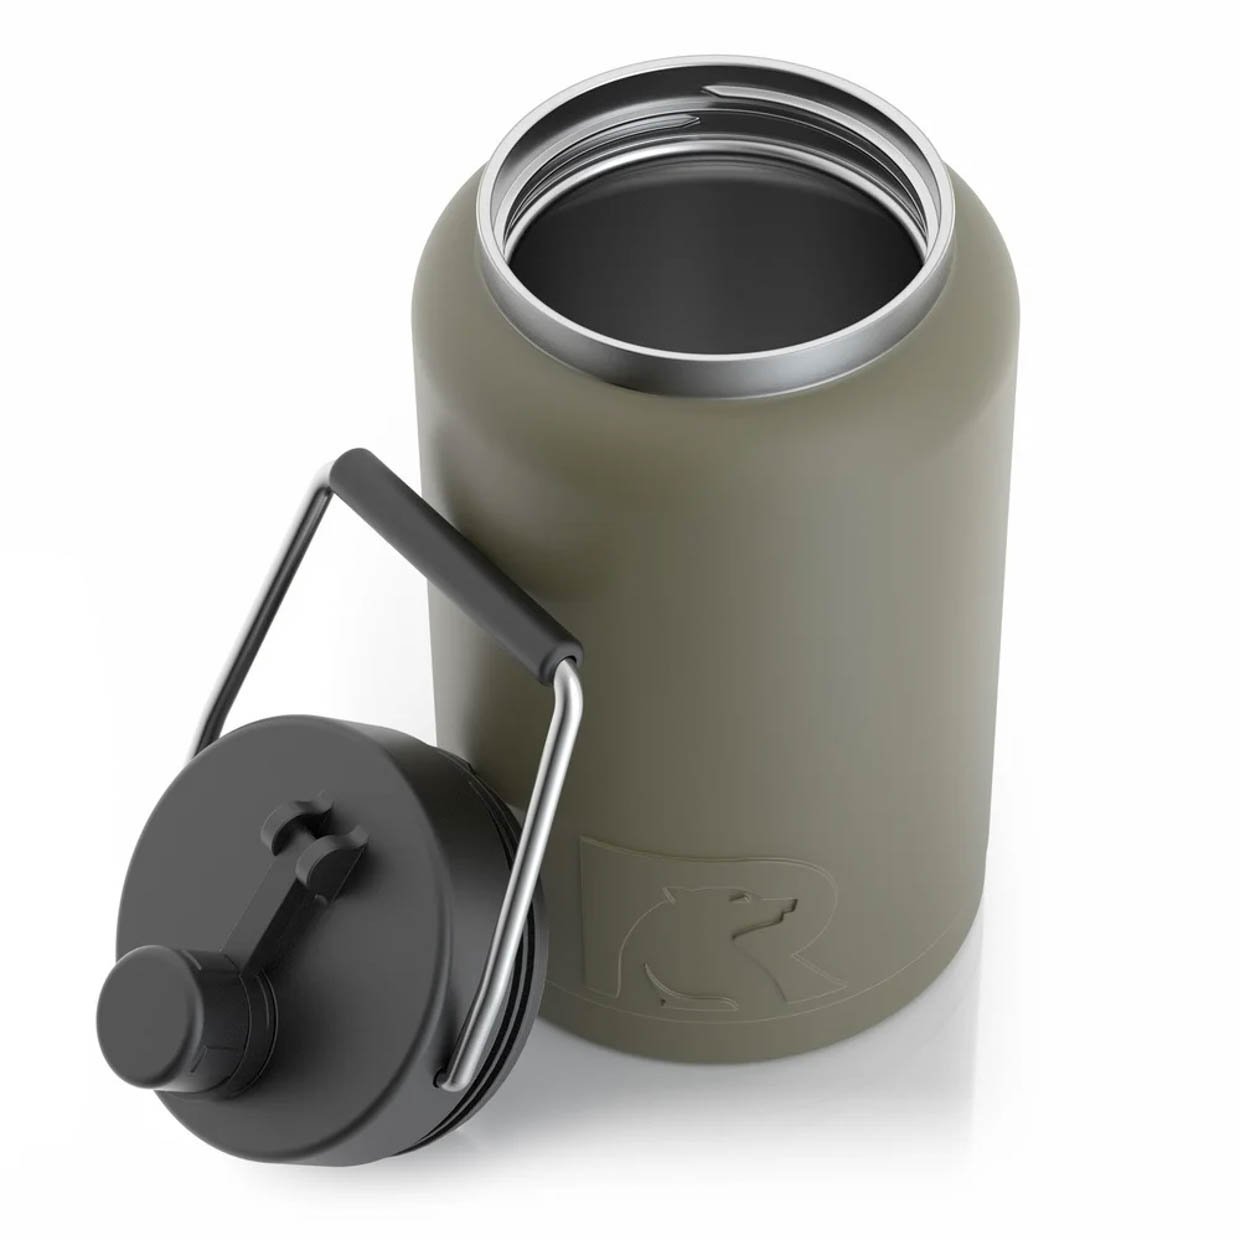 RTIC Stainless Steel Insulated Jugs